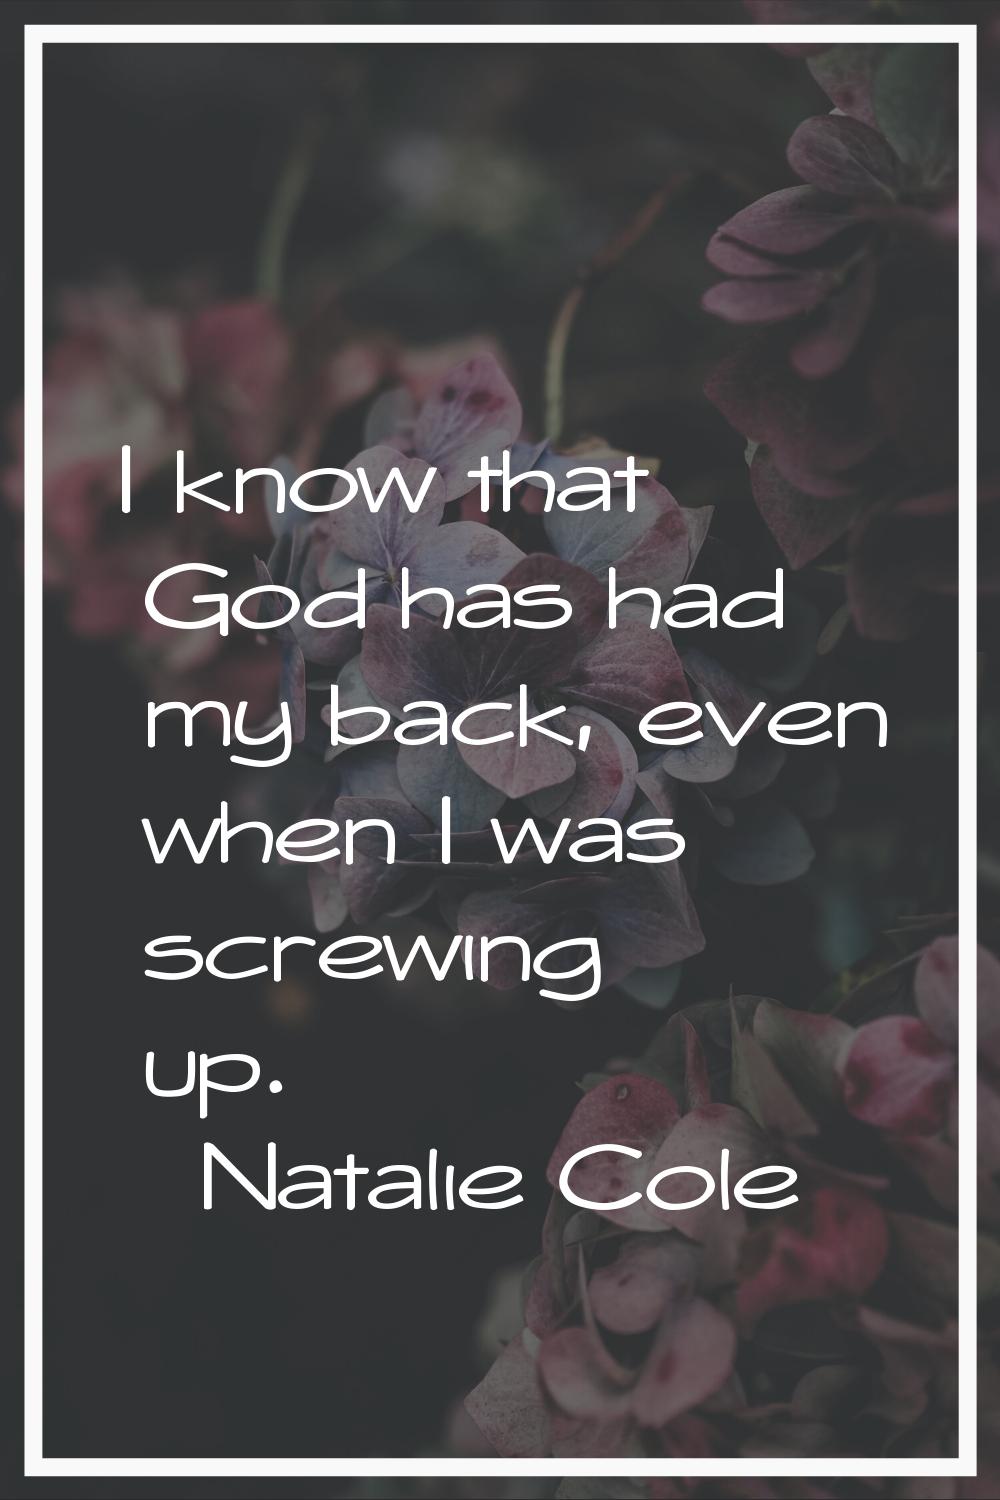 I know that God has had my back, even when I was screwing up.